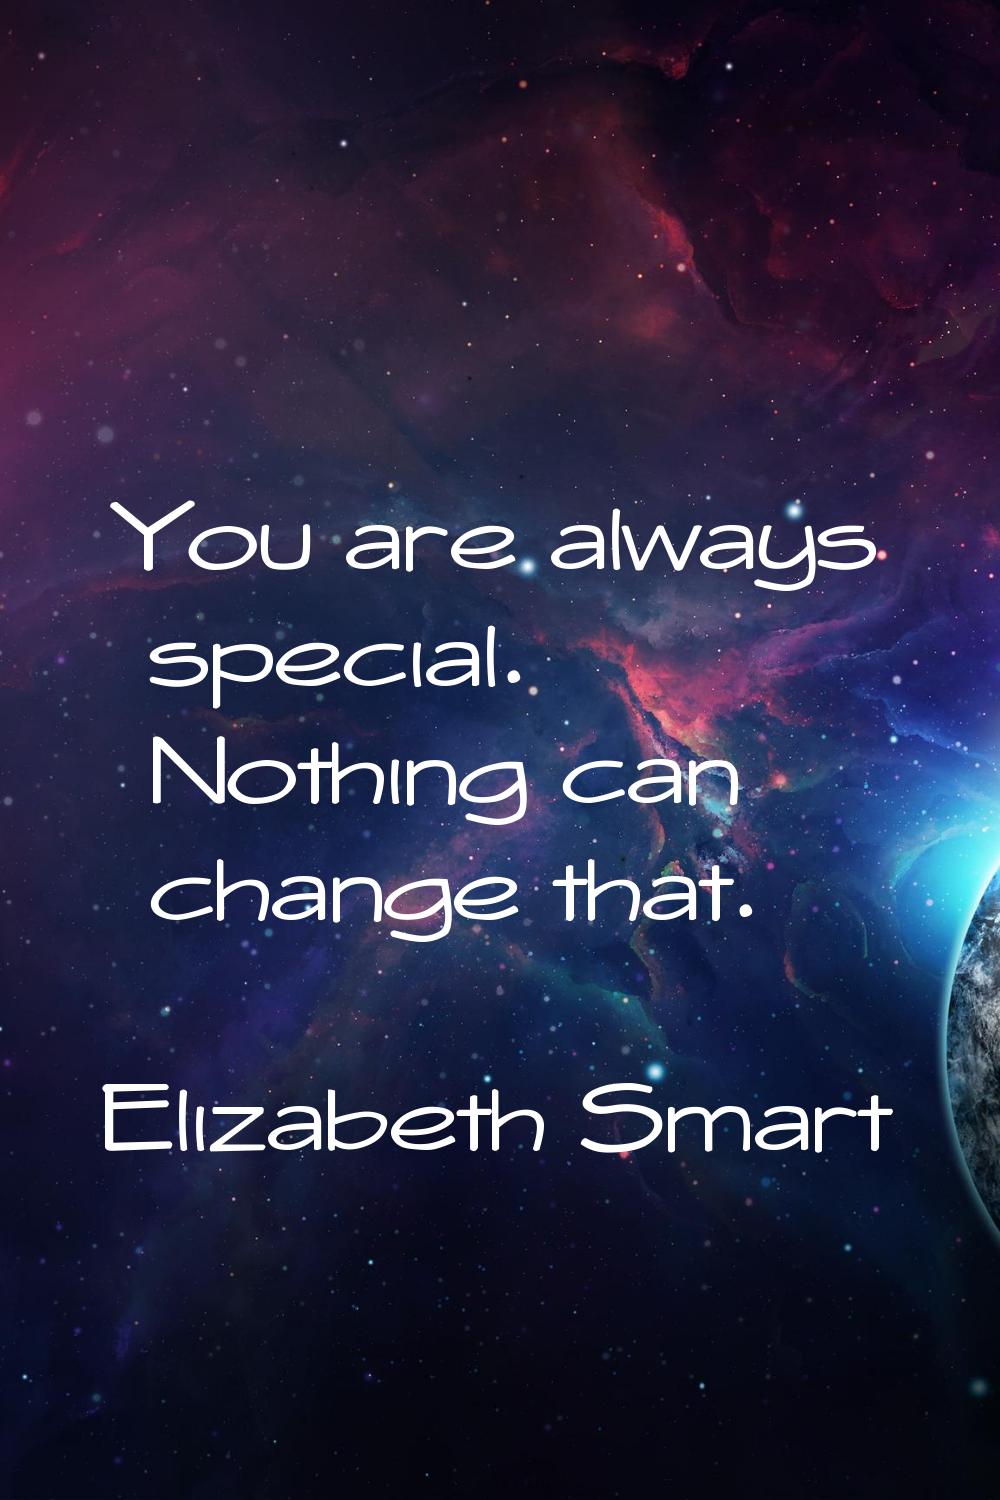 You are always special. Nothing can change that.